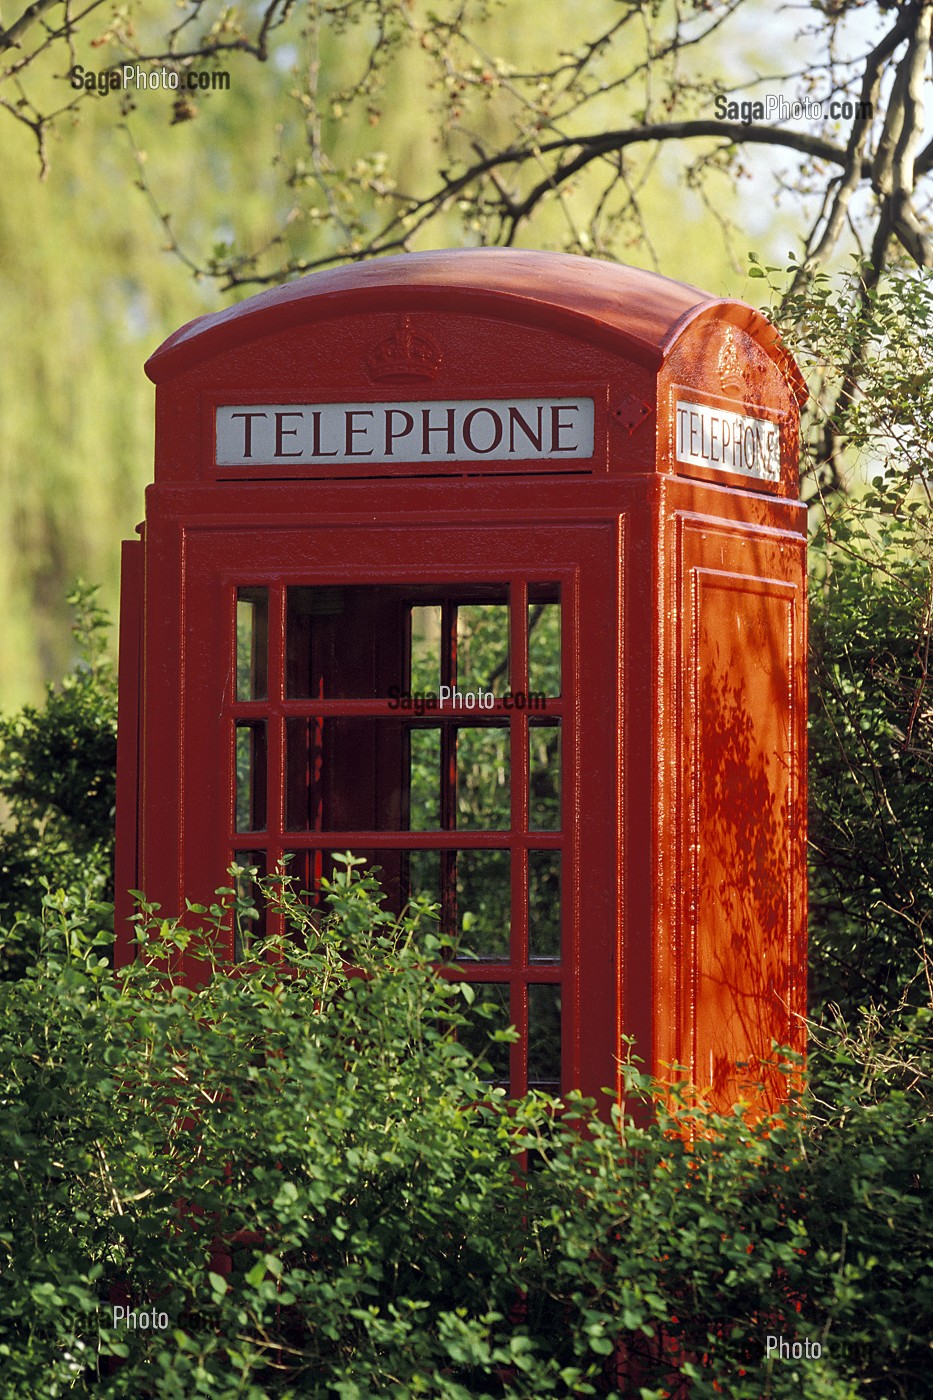 CABINE TELEPHONIQUE ROUGE ANGLAISE, LONDRES, ANGLETERRE 